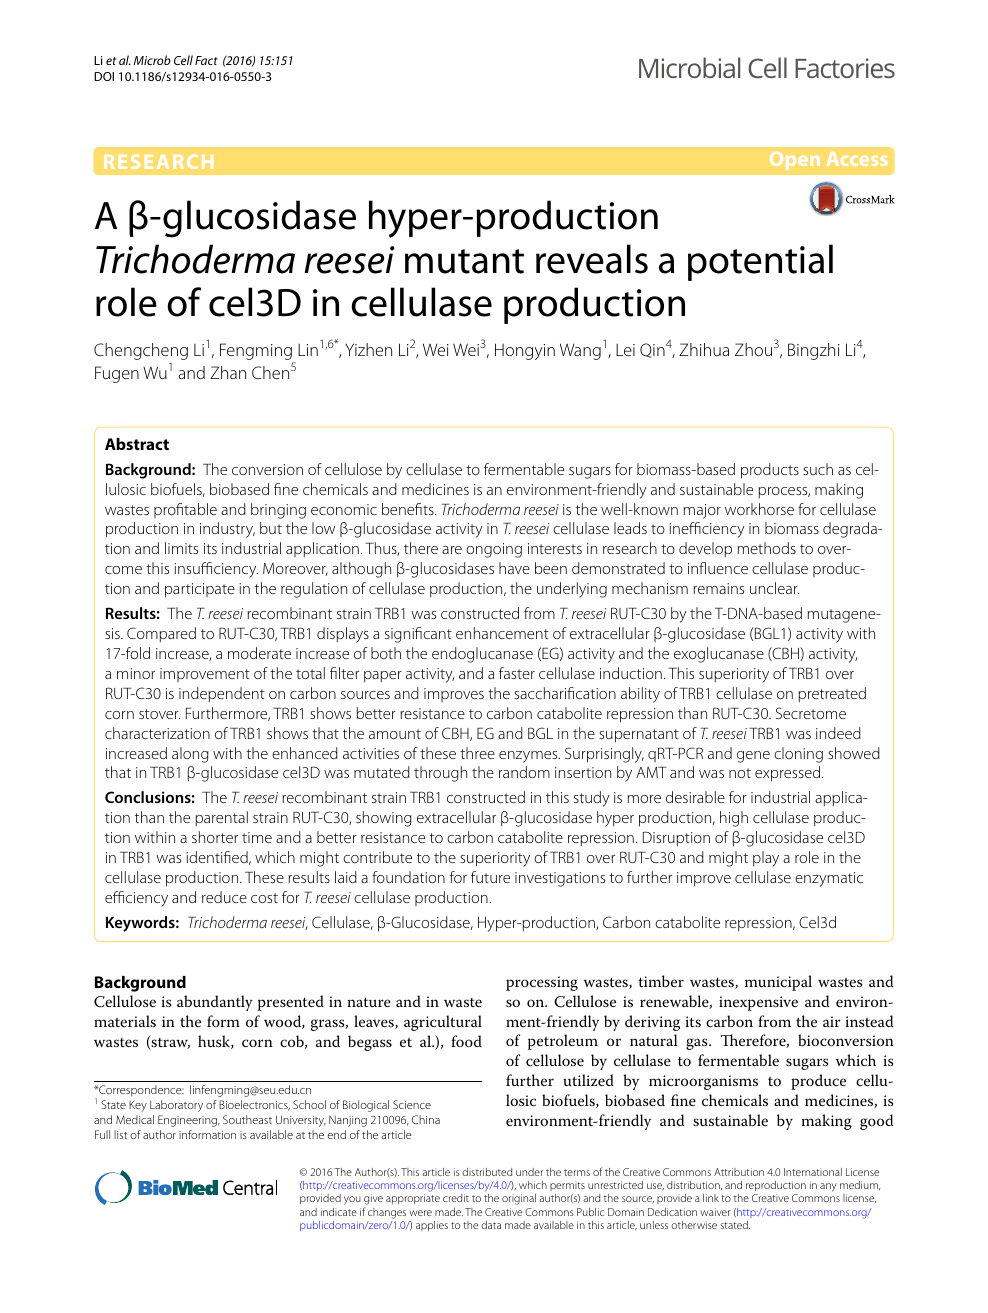 A β-glucosidase hyper-production reesei mutant reveals a potential role in cellulase production – topic of research paper in Biological sciences. Download scholarly article PDF and read for free